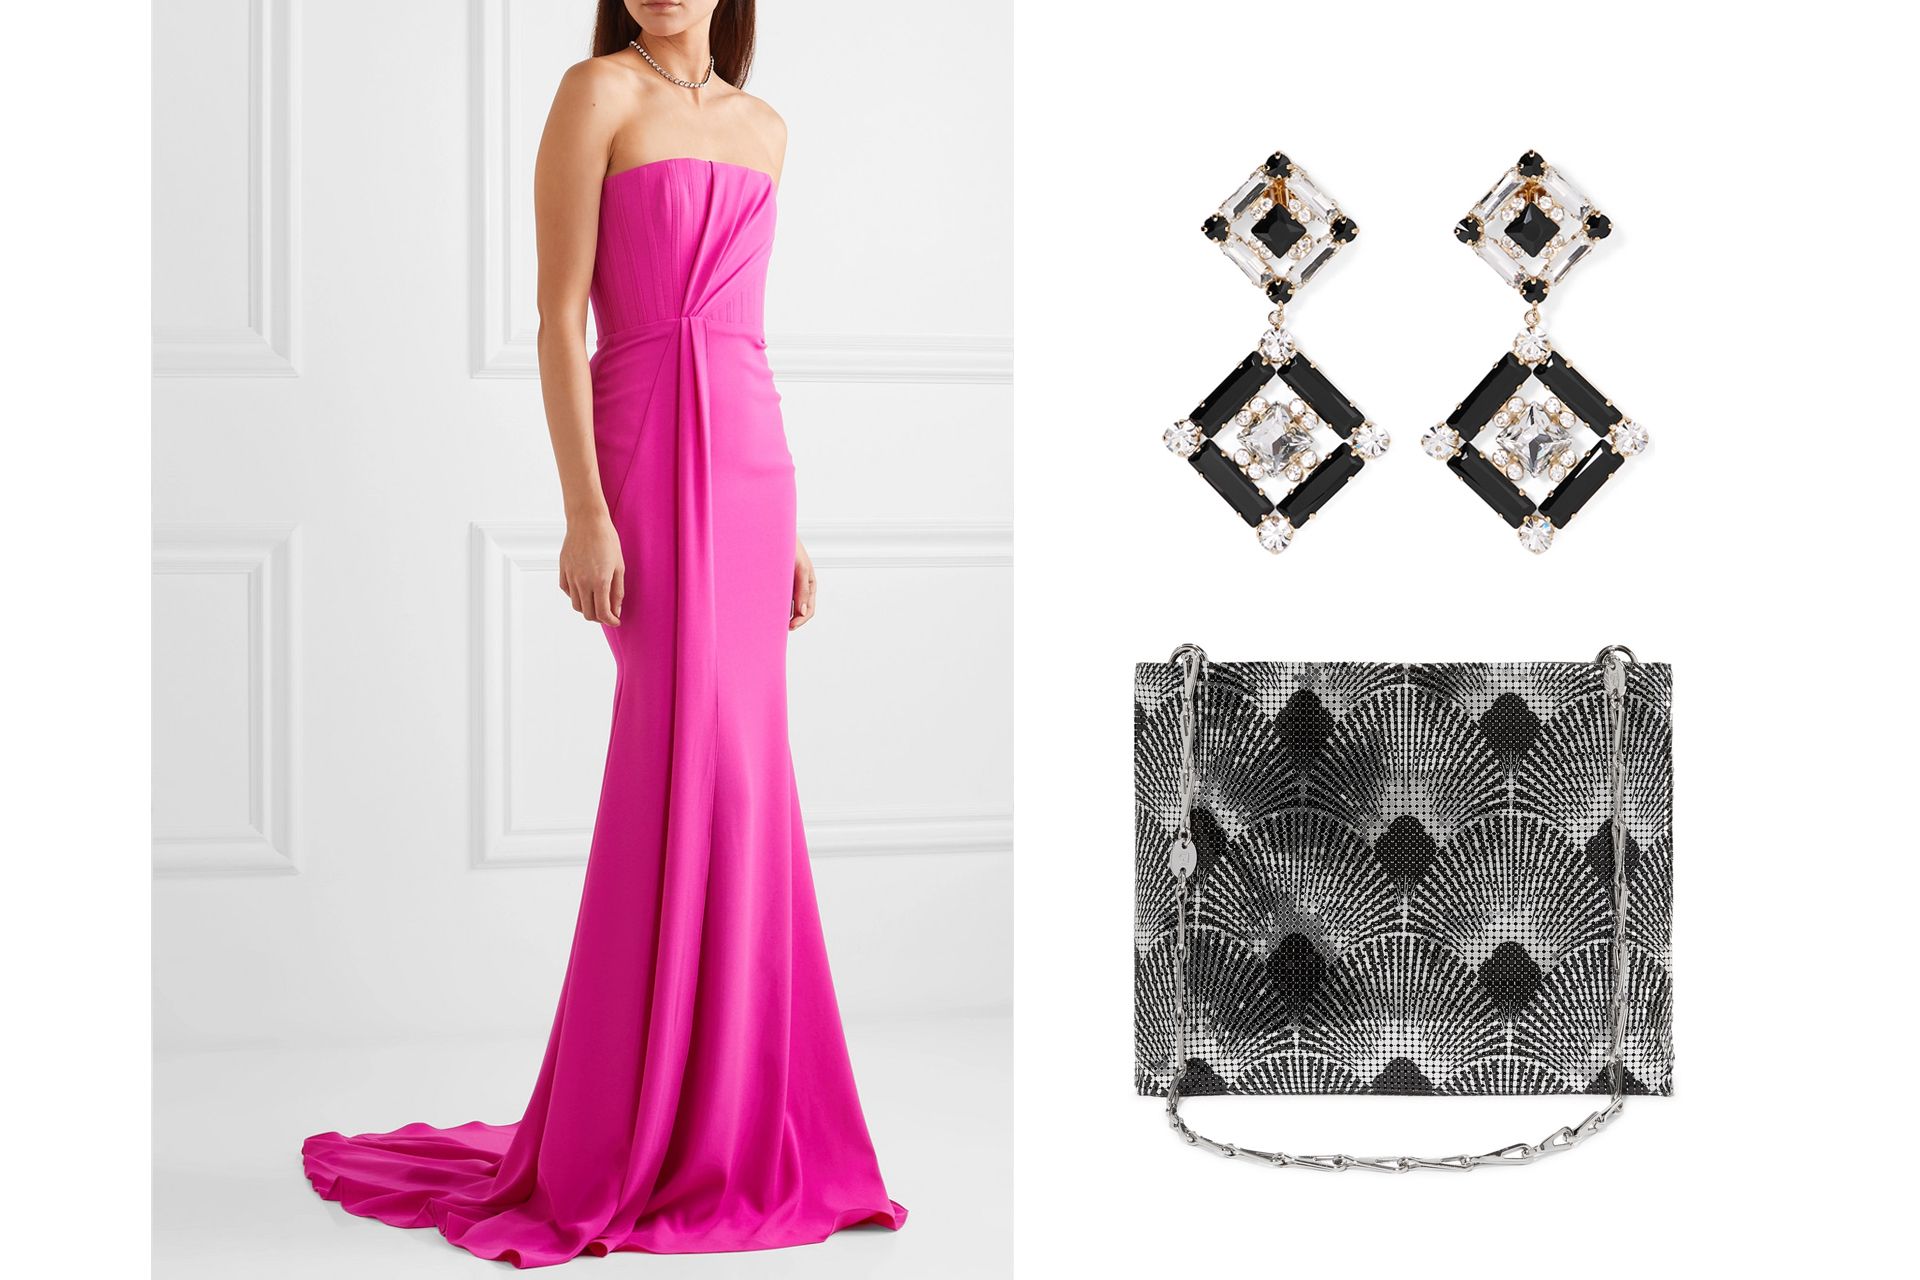 How To Complete Your Look For The Tatler Ball With The Right Accessories